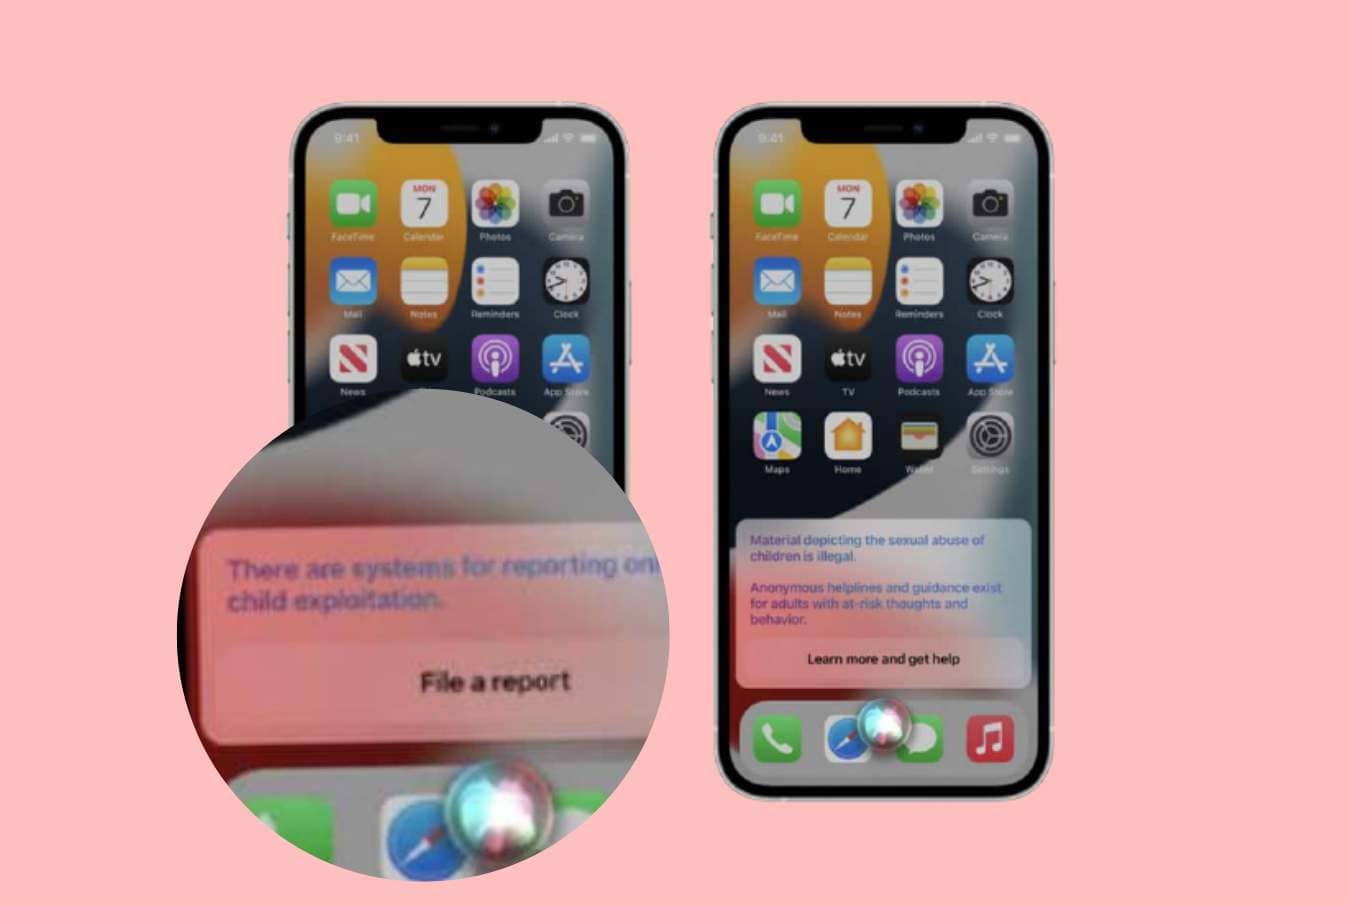 Apple to scan U.S. iPhones for images of child abuse